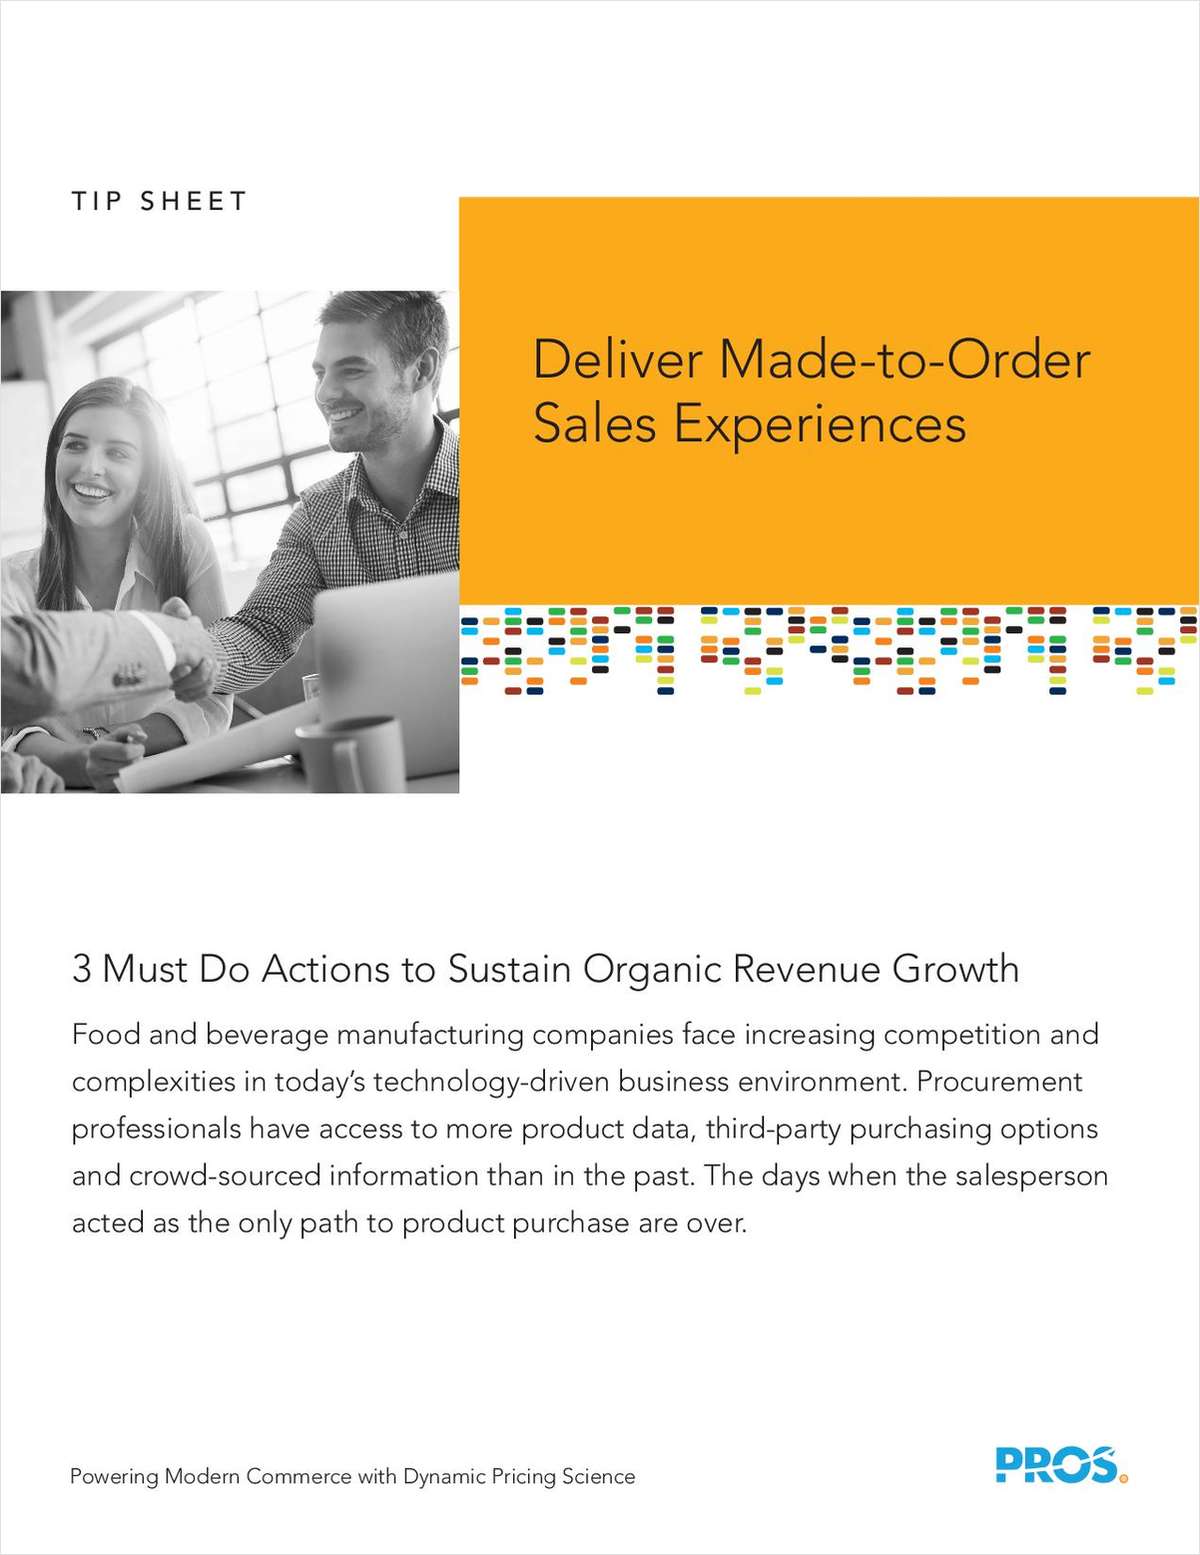 Deliver Made-to-Order Sales Experiences